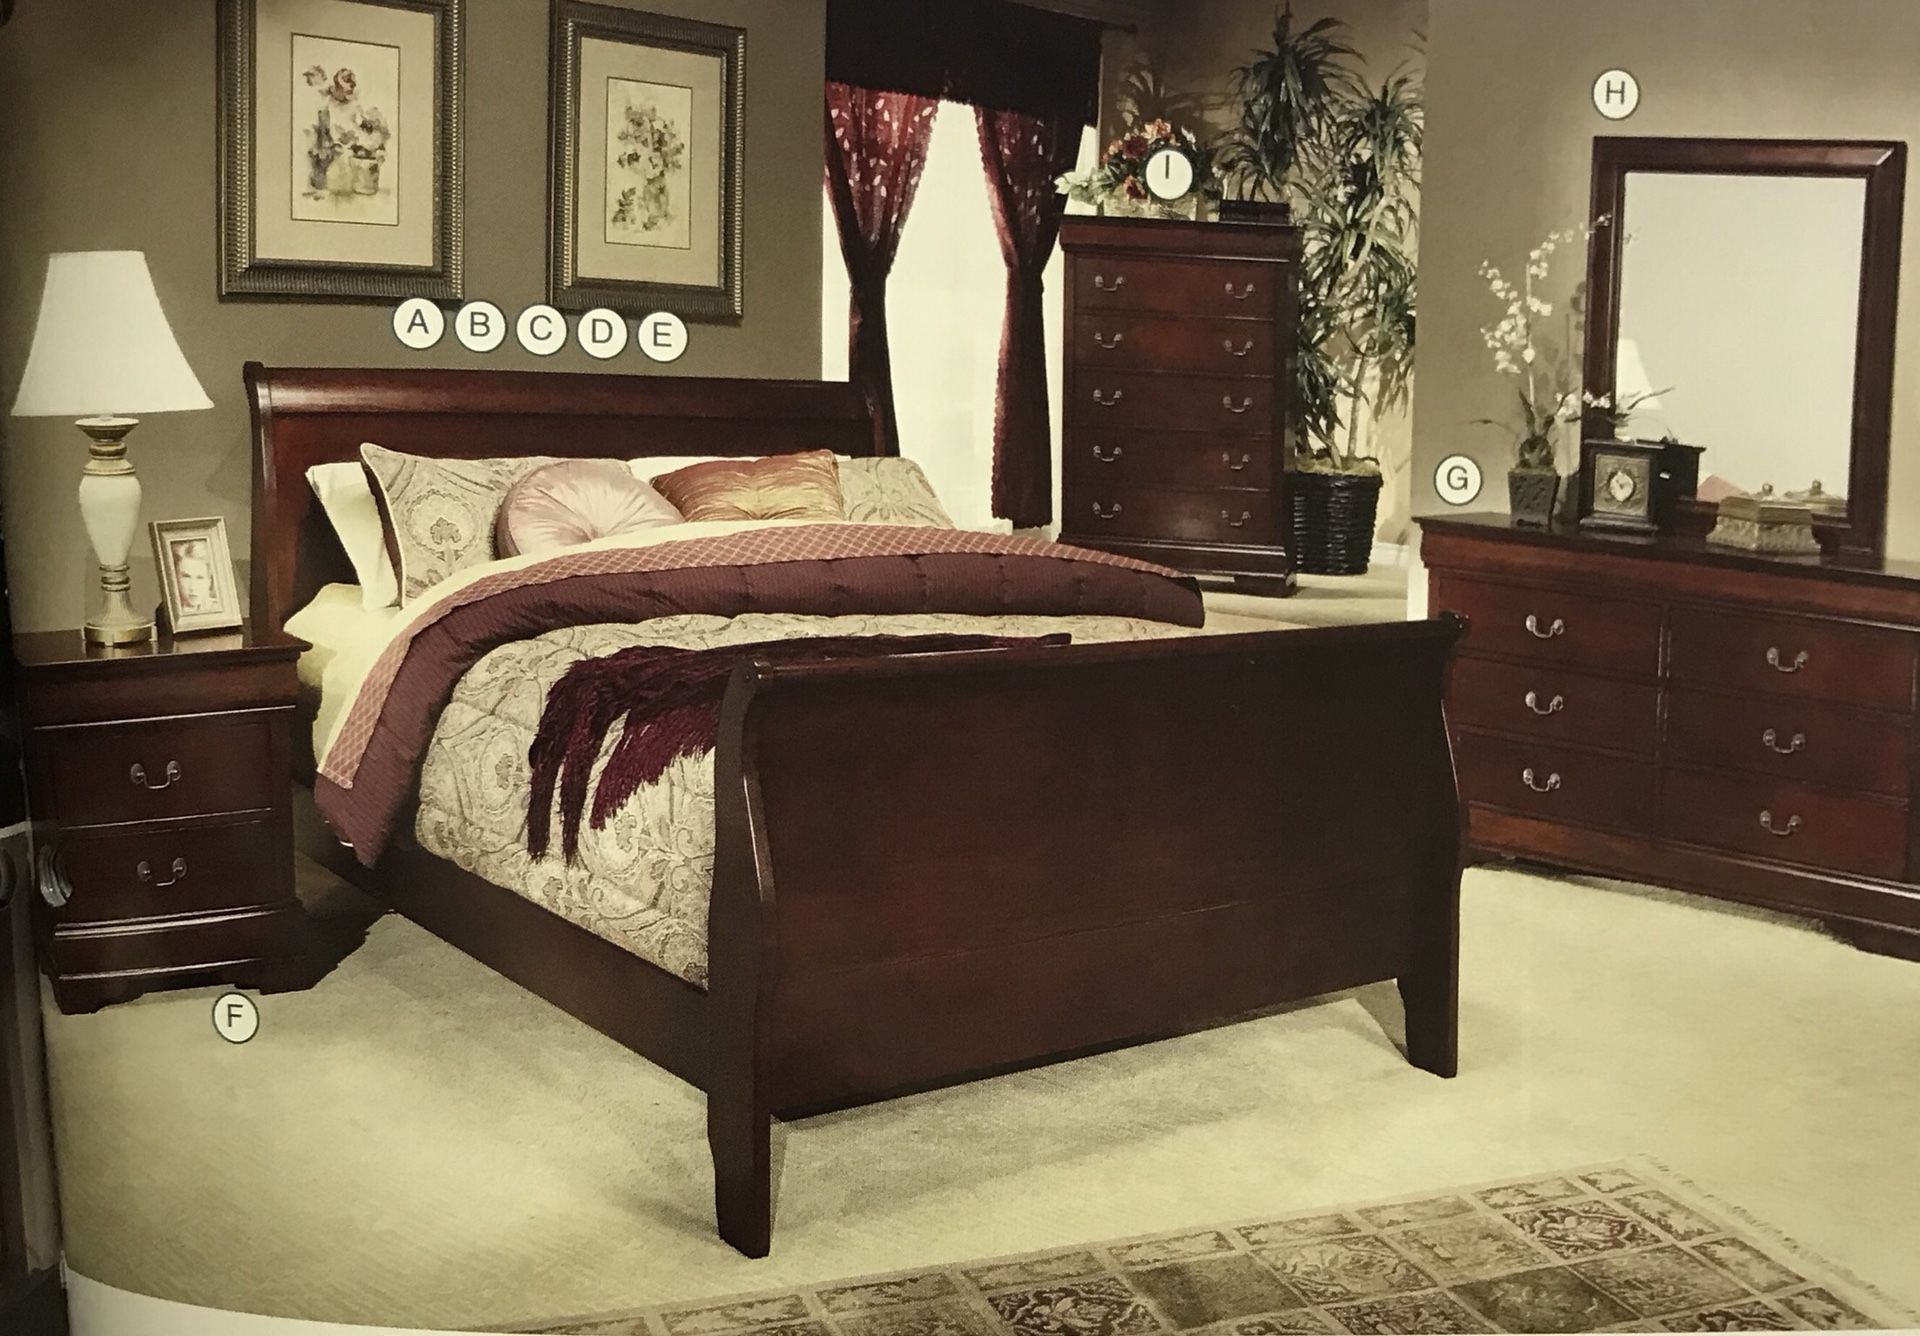 LOUIS PHILIPPE CHERRY KING BED FRAME $375